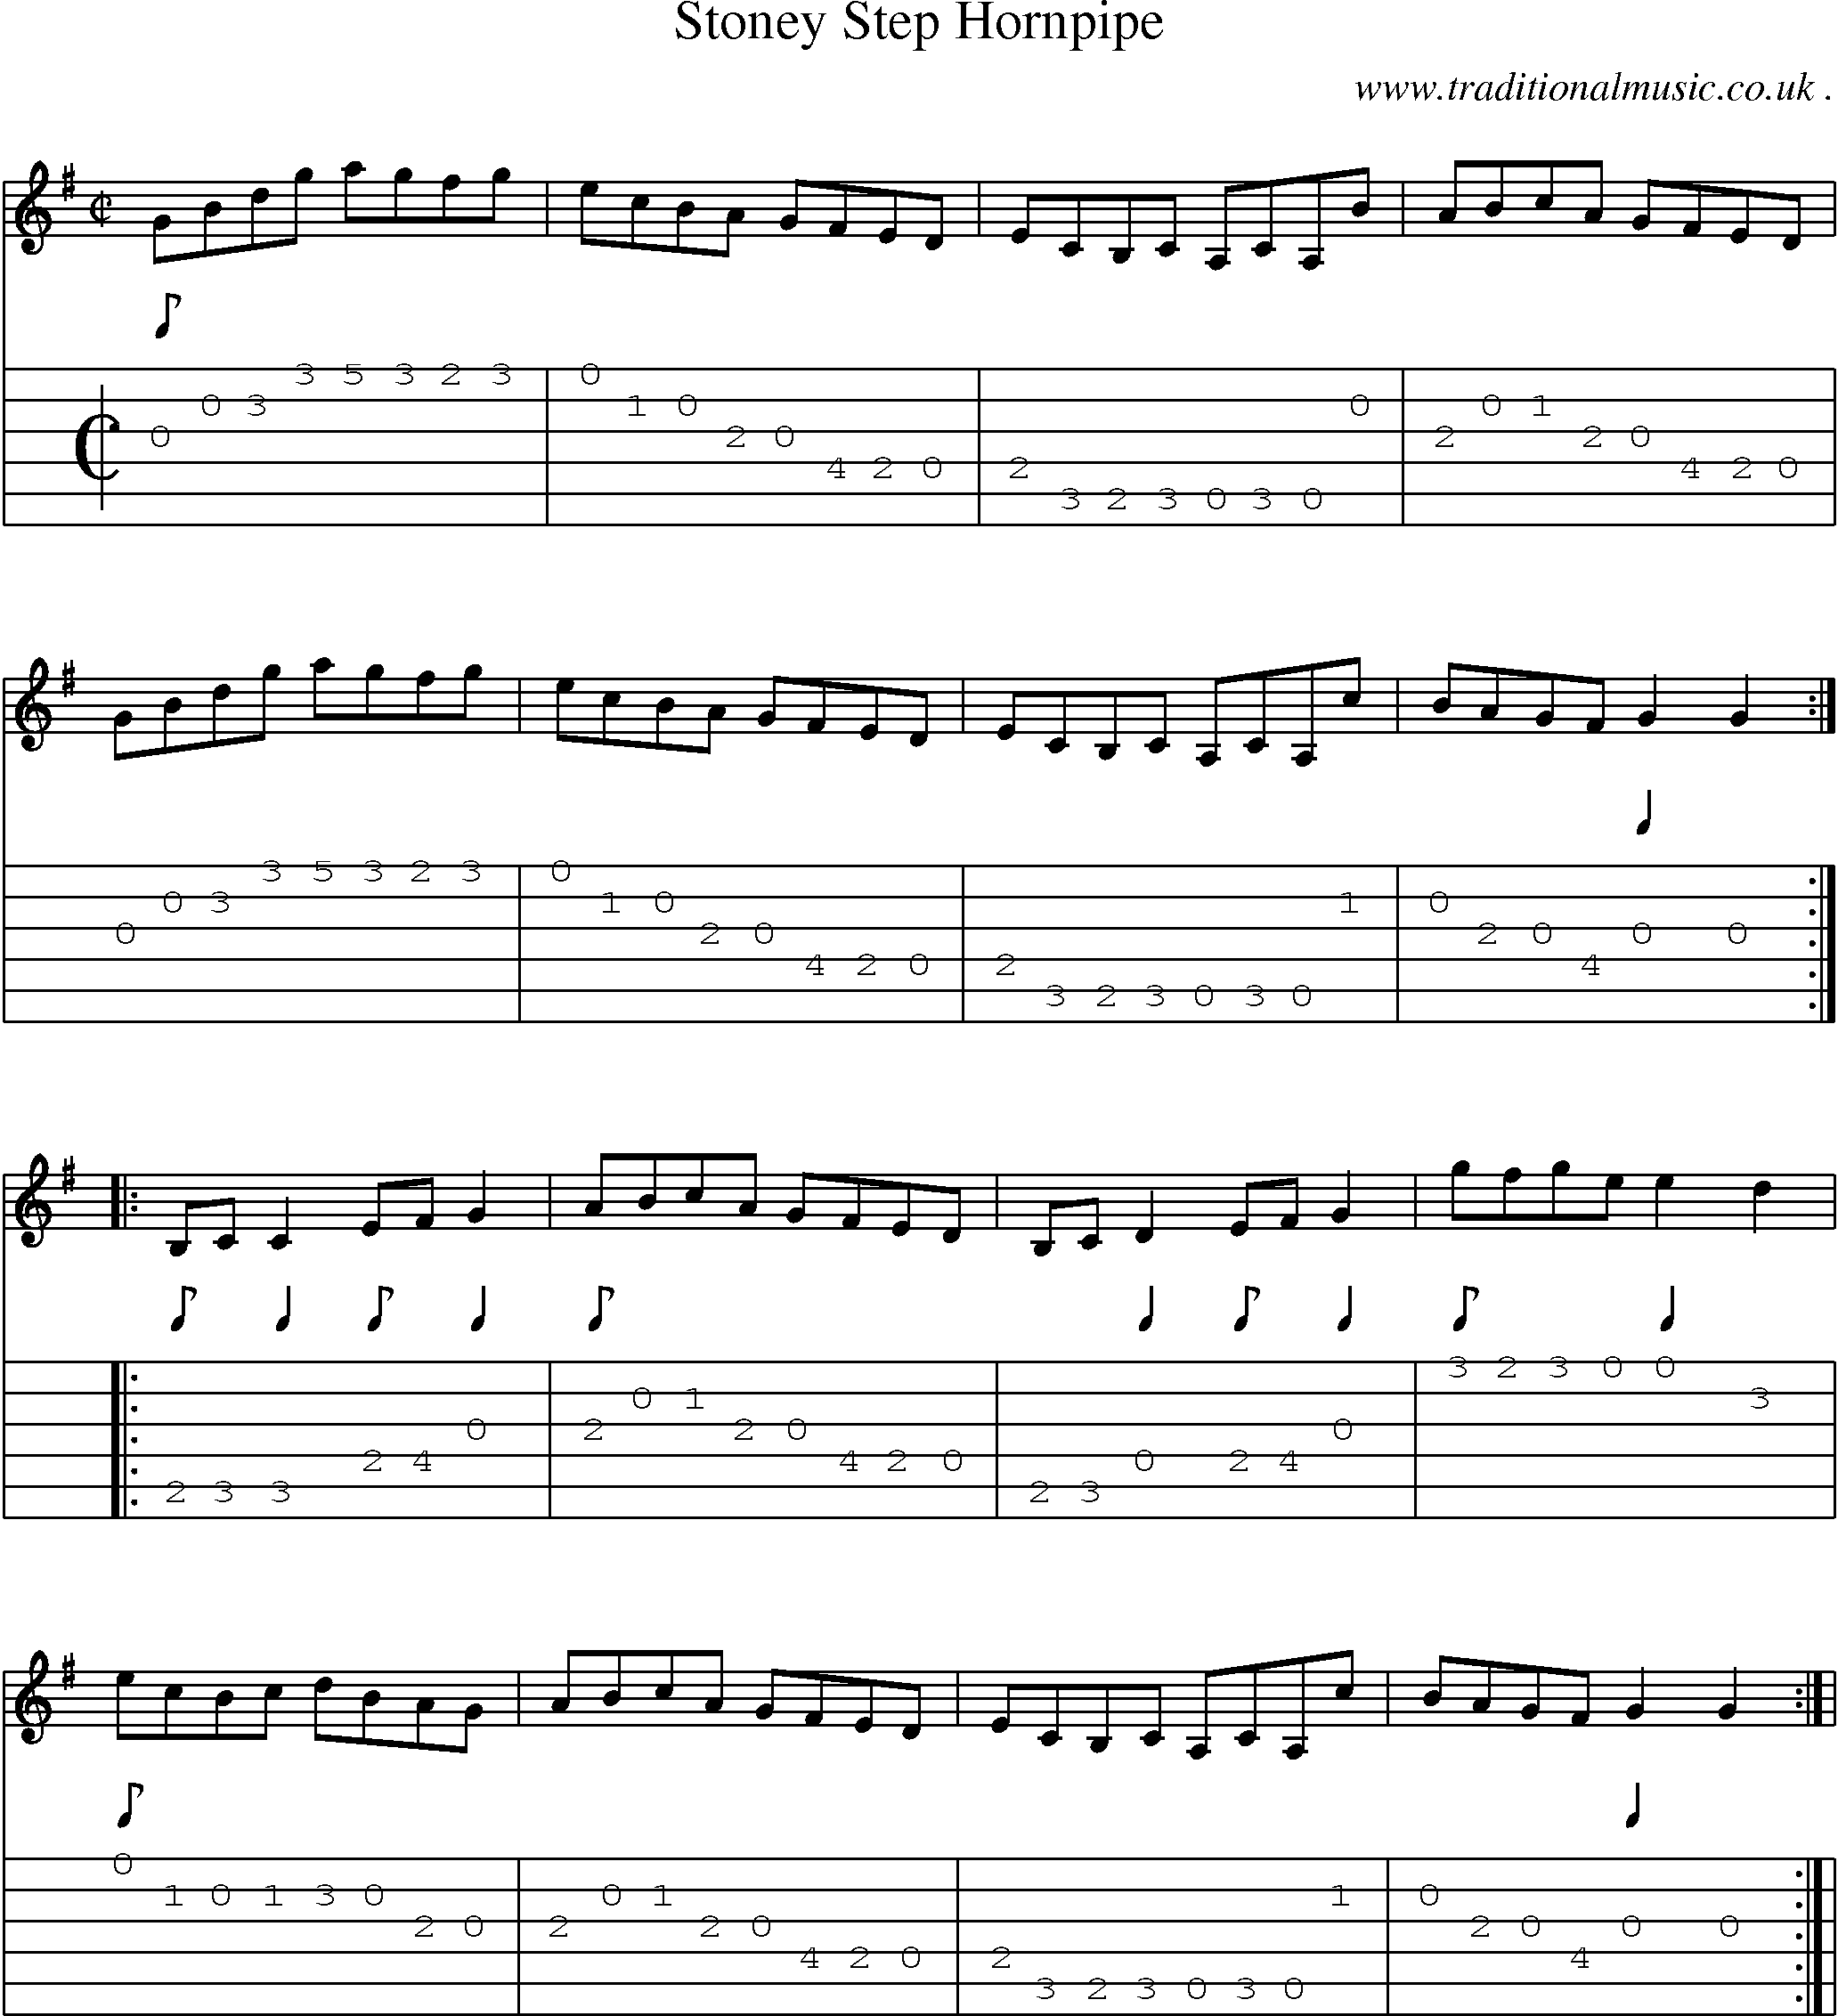 Sheet-Music and Guitar Tabs for Stoney Step Hornpipe